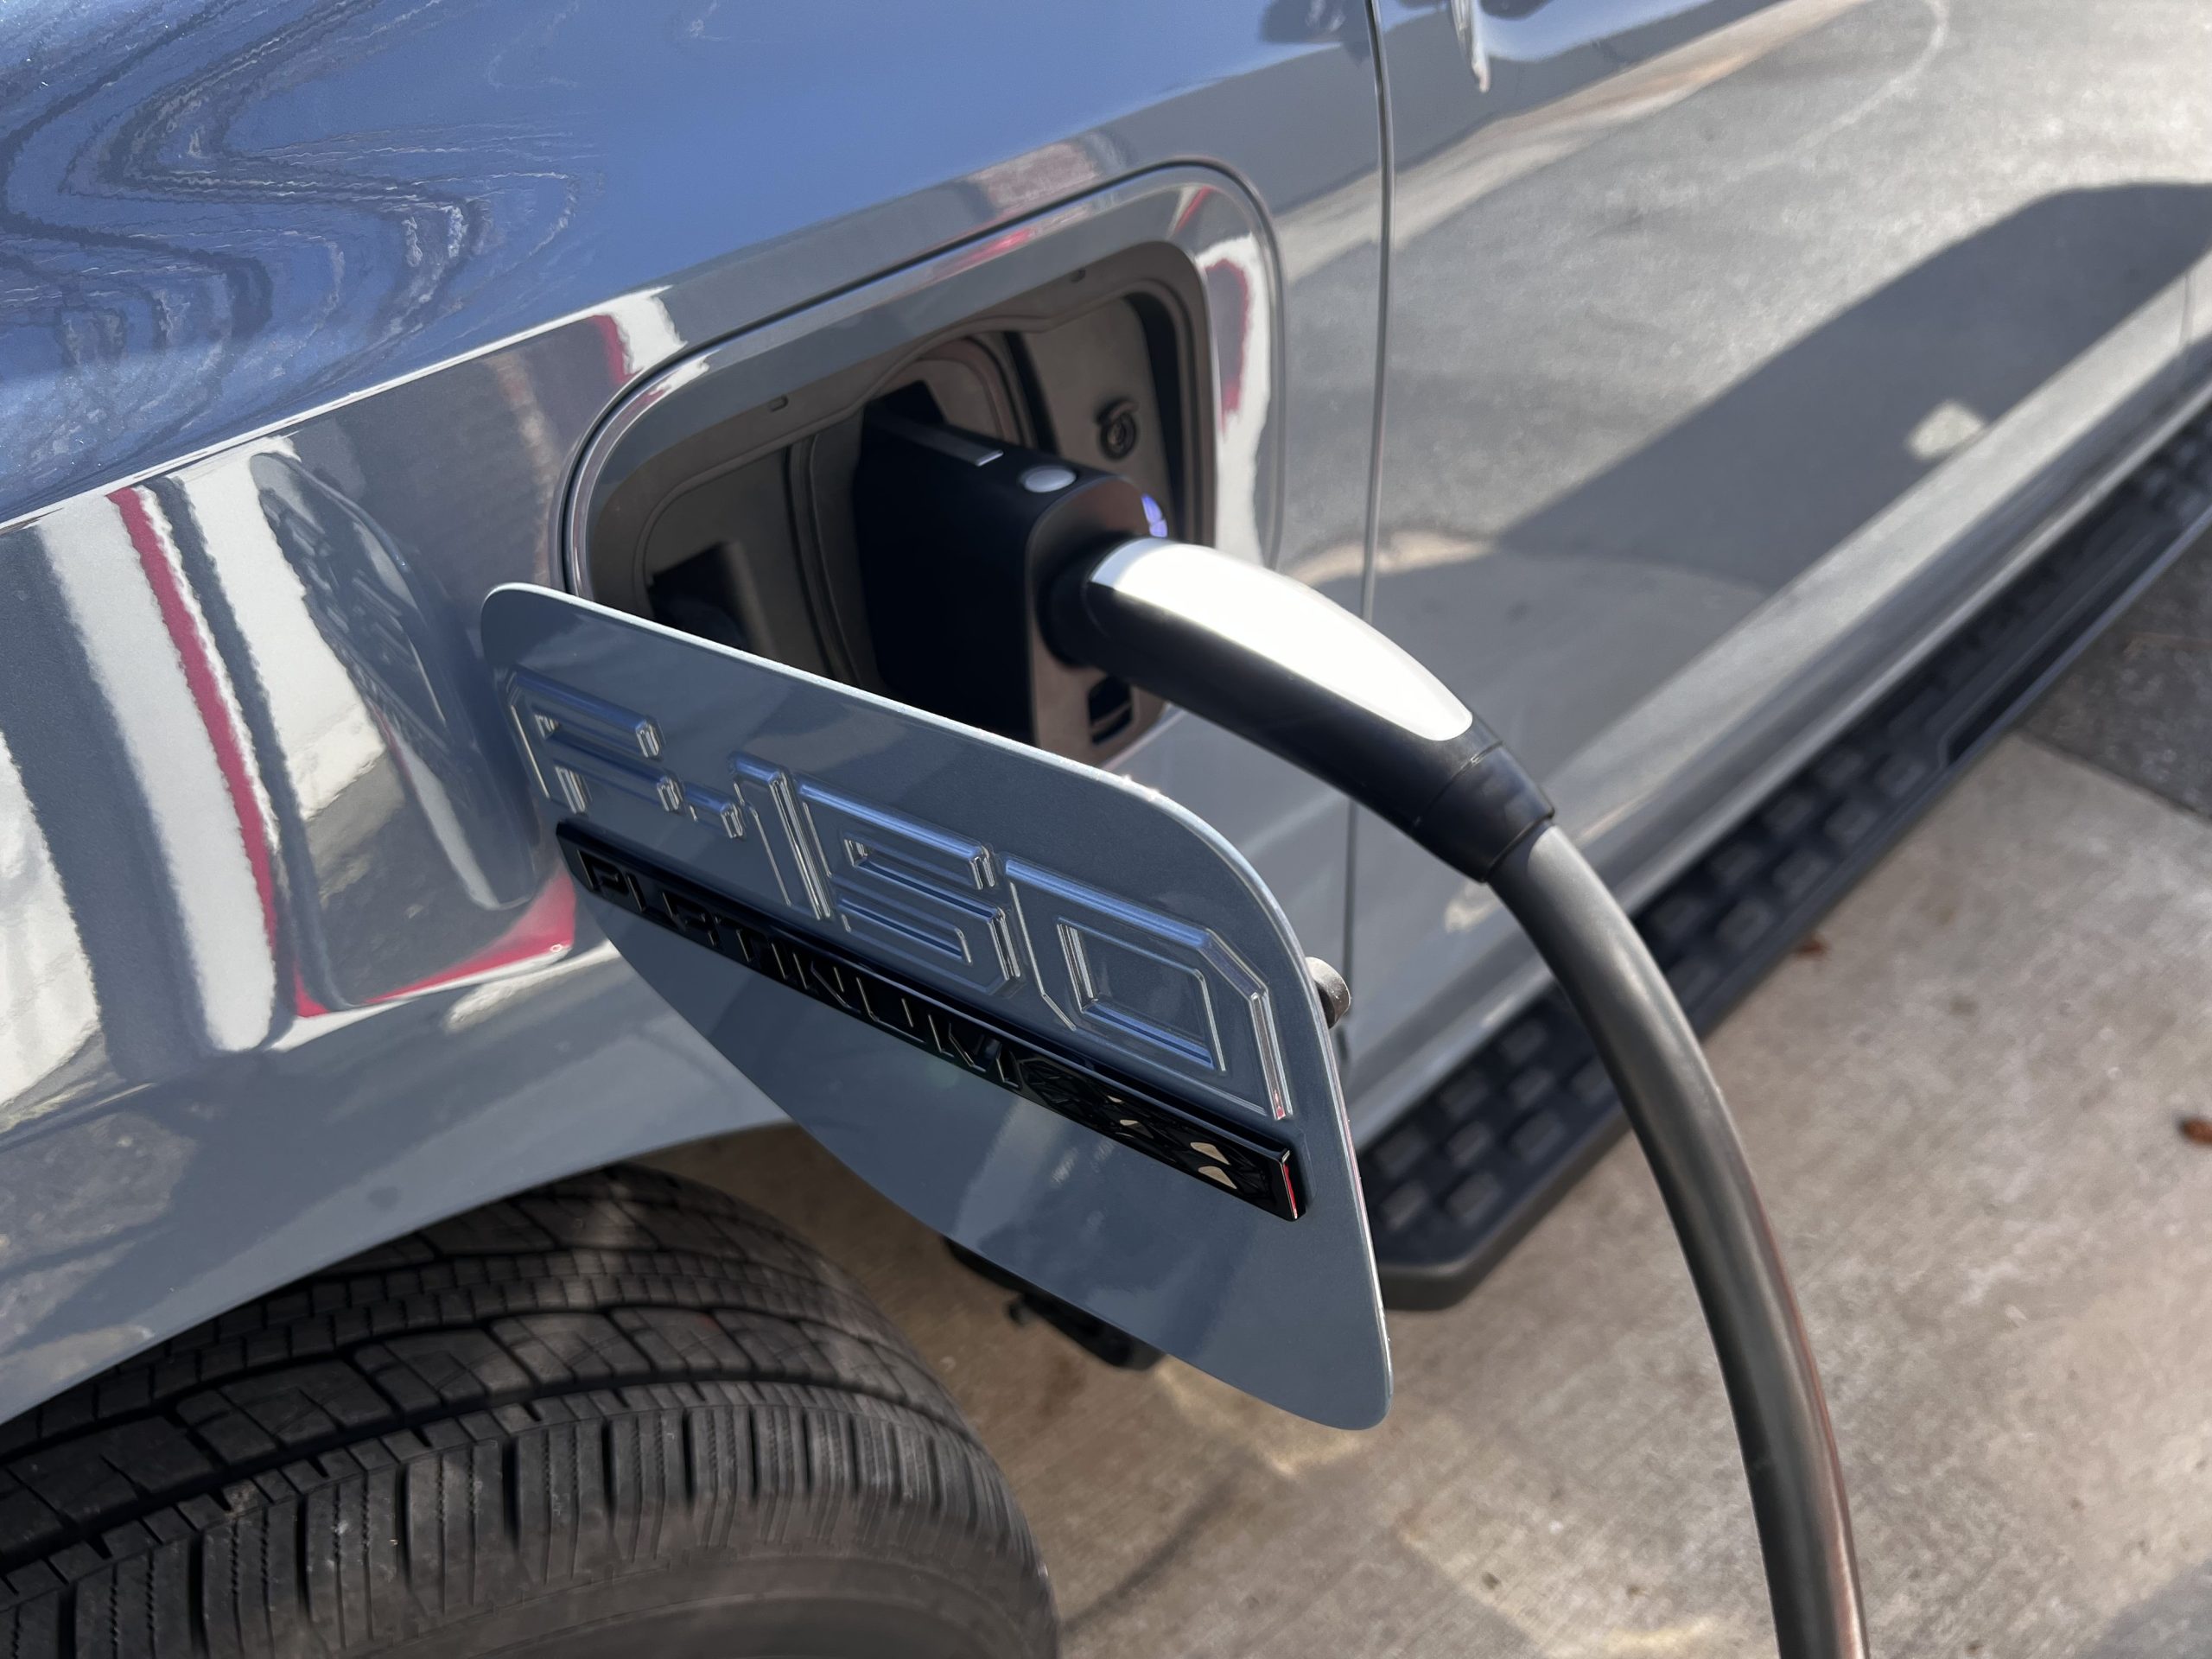 I took a Ford F-150 Lightning to Tesla Superchargers: The Good and Bad Auto Recent